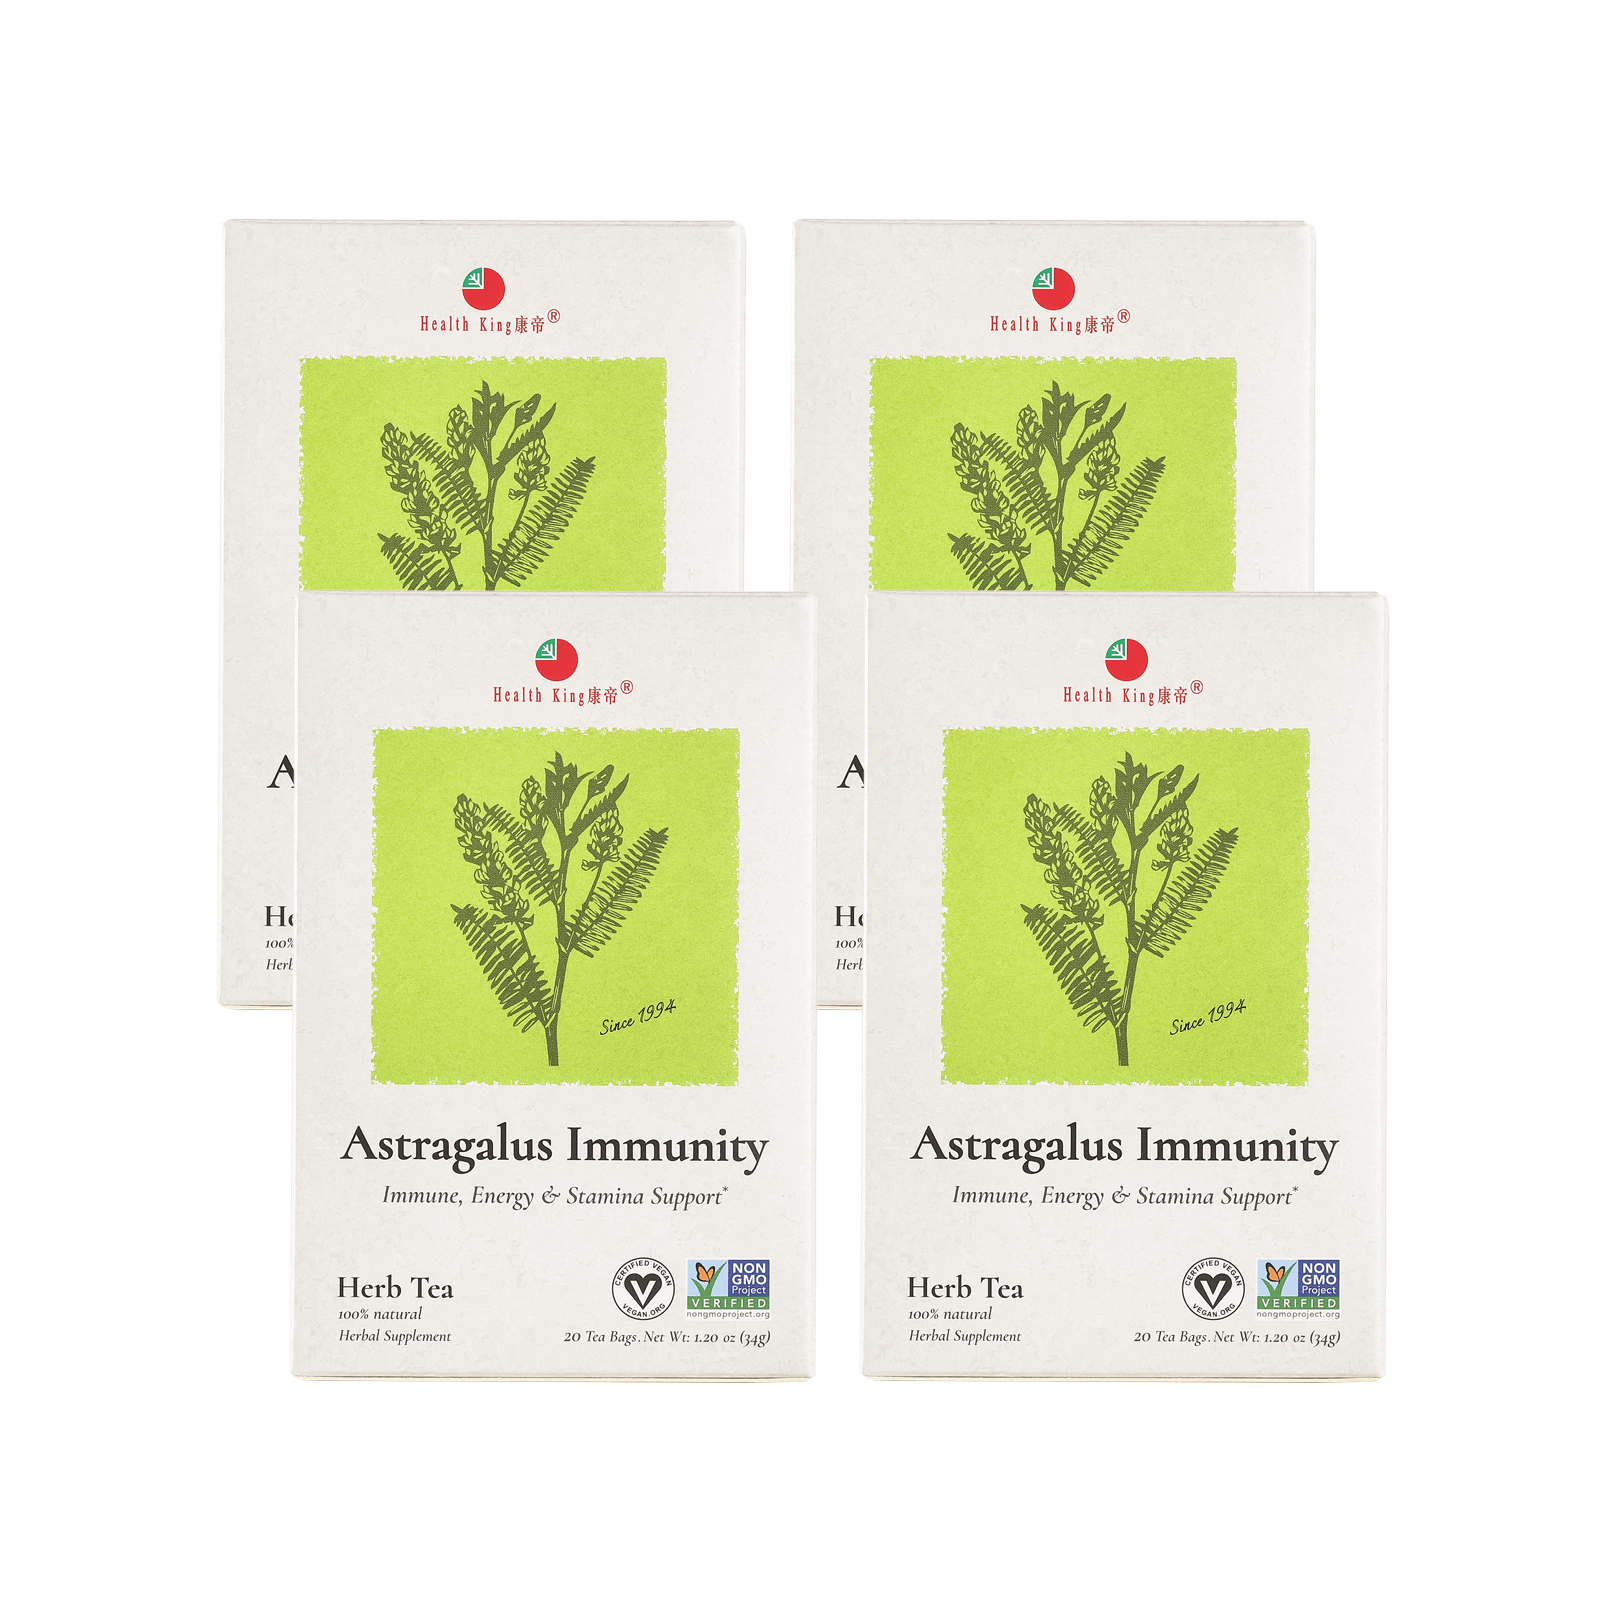 Astragalus Immunity Herb Tea packets displayed together